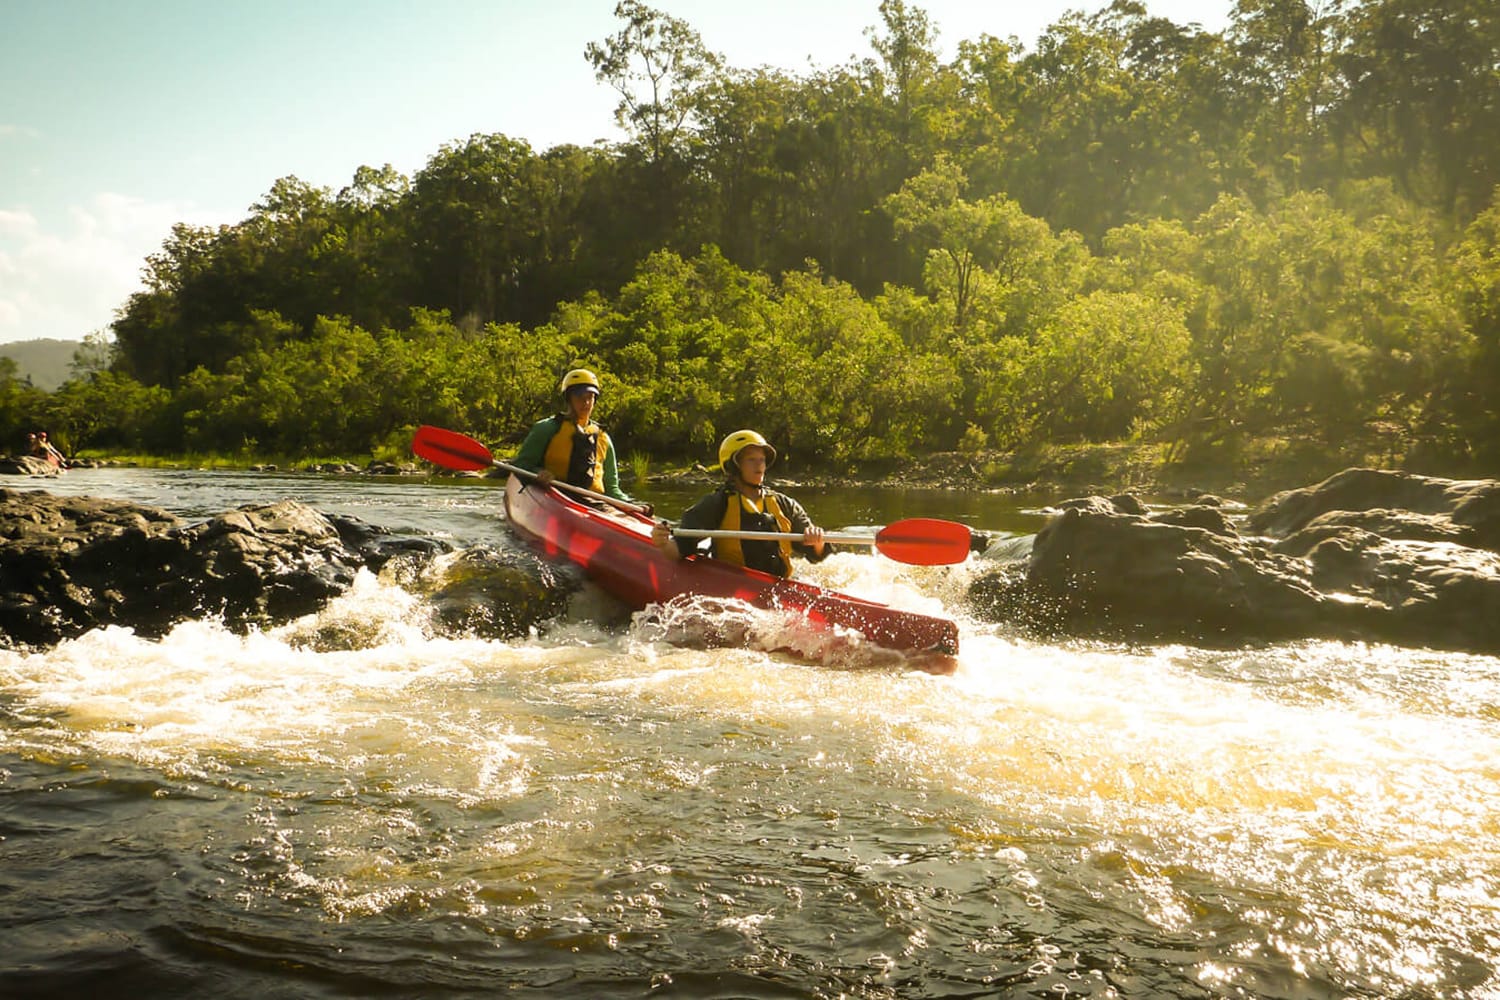 Whitewater Rafting Day Trip - Upper Nymboida River, NSW